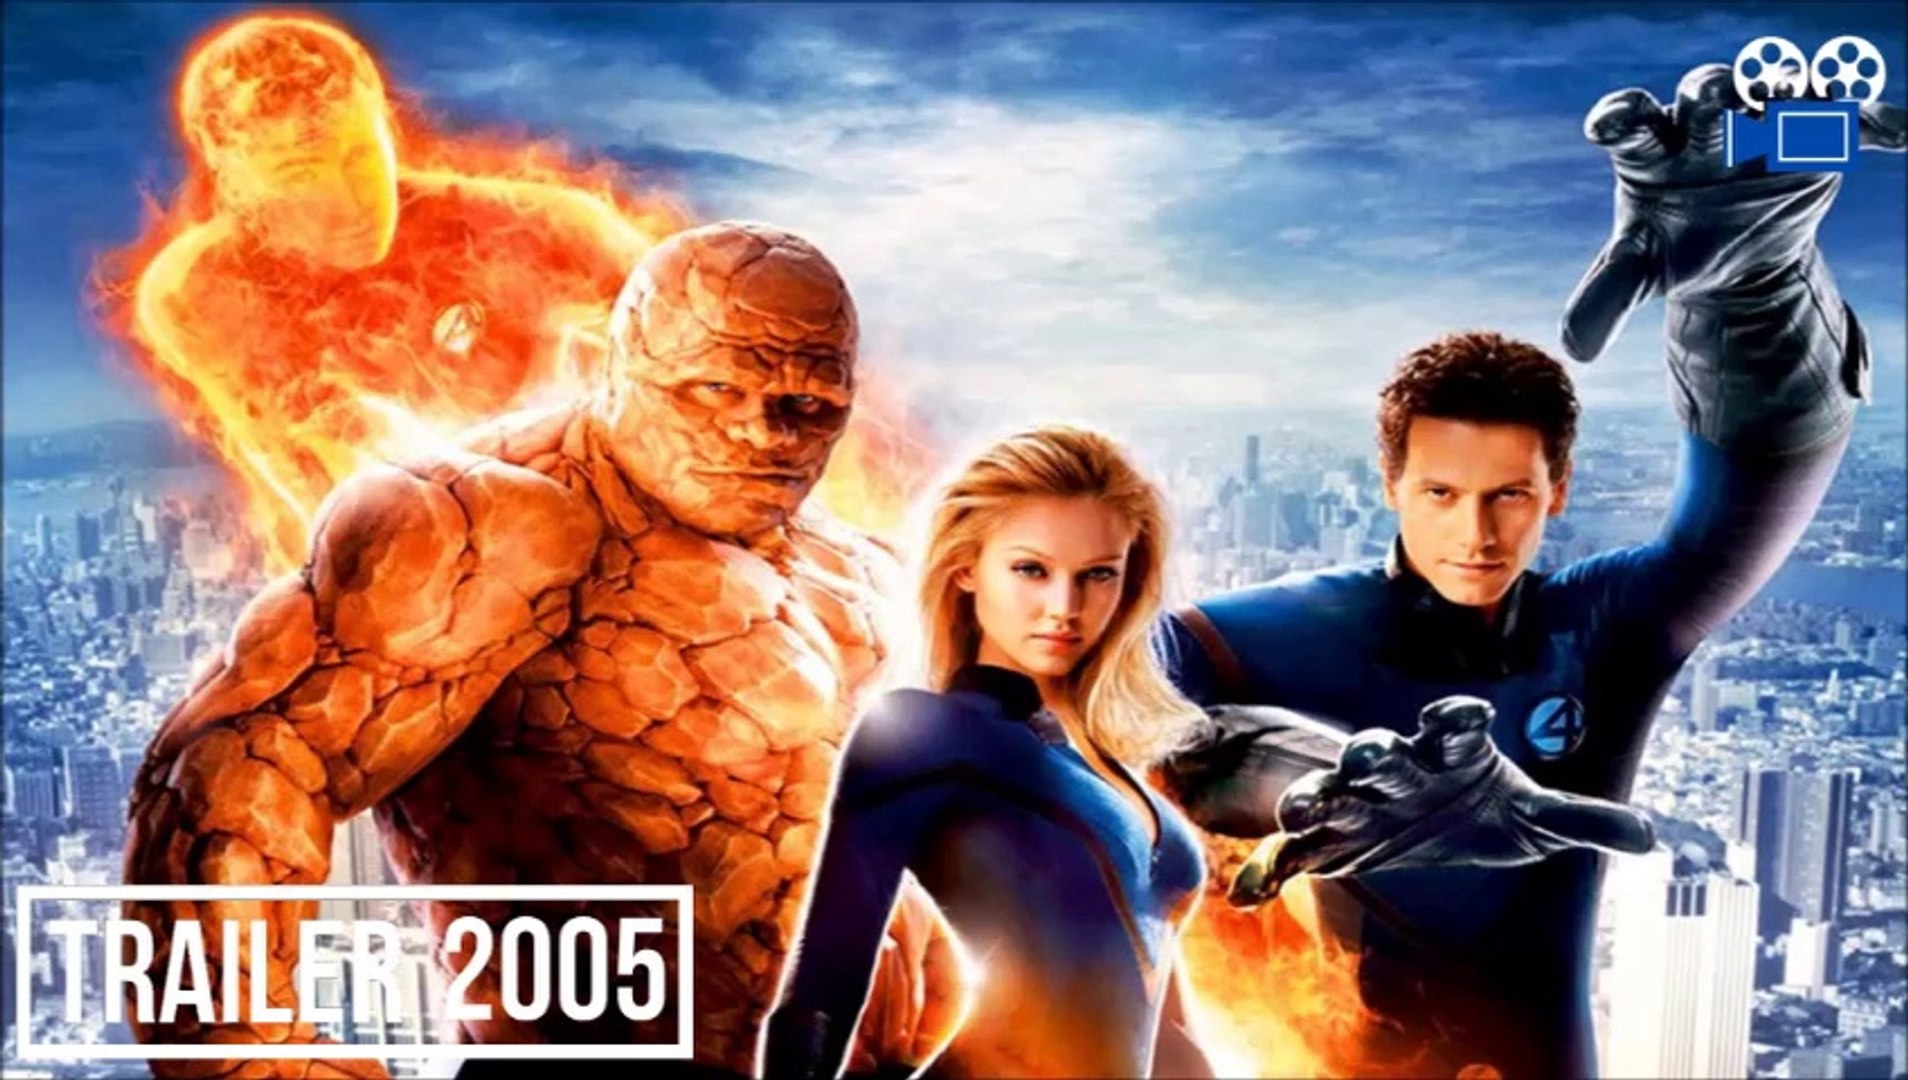 Fantastic Four (2005) - Official Trailer HD - video Dailymotion